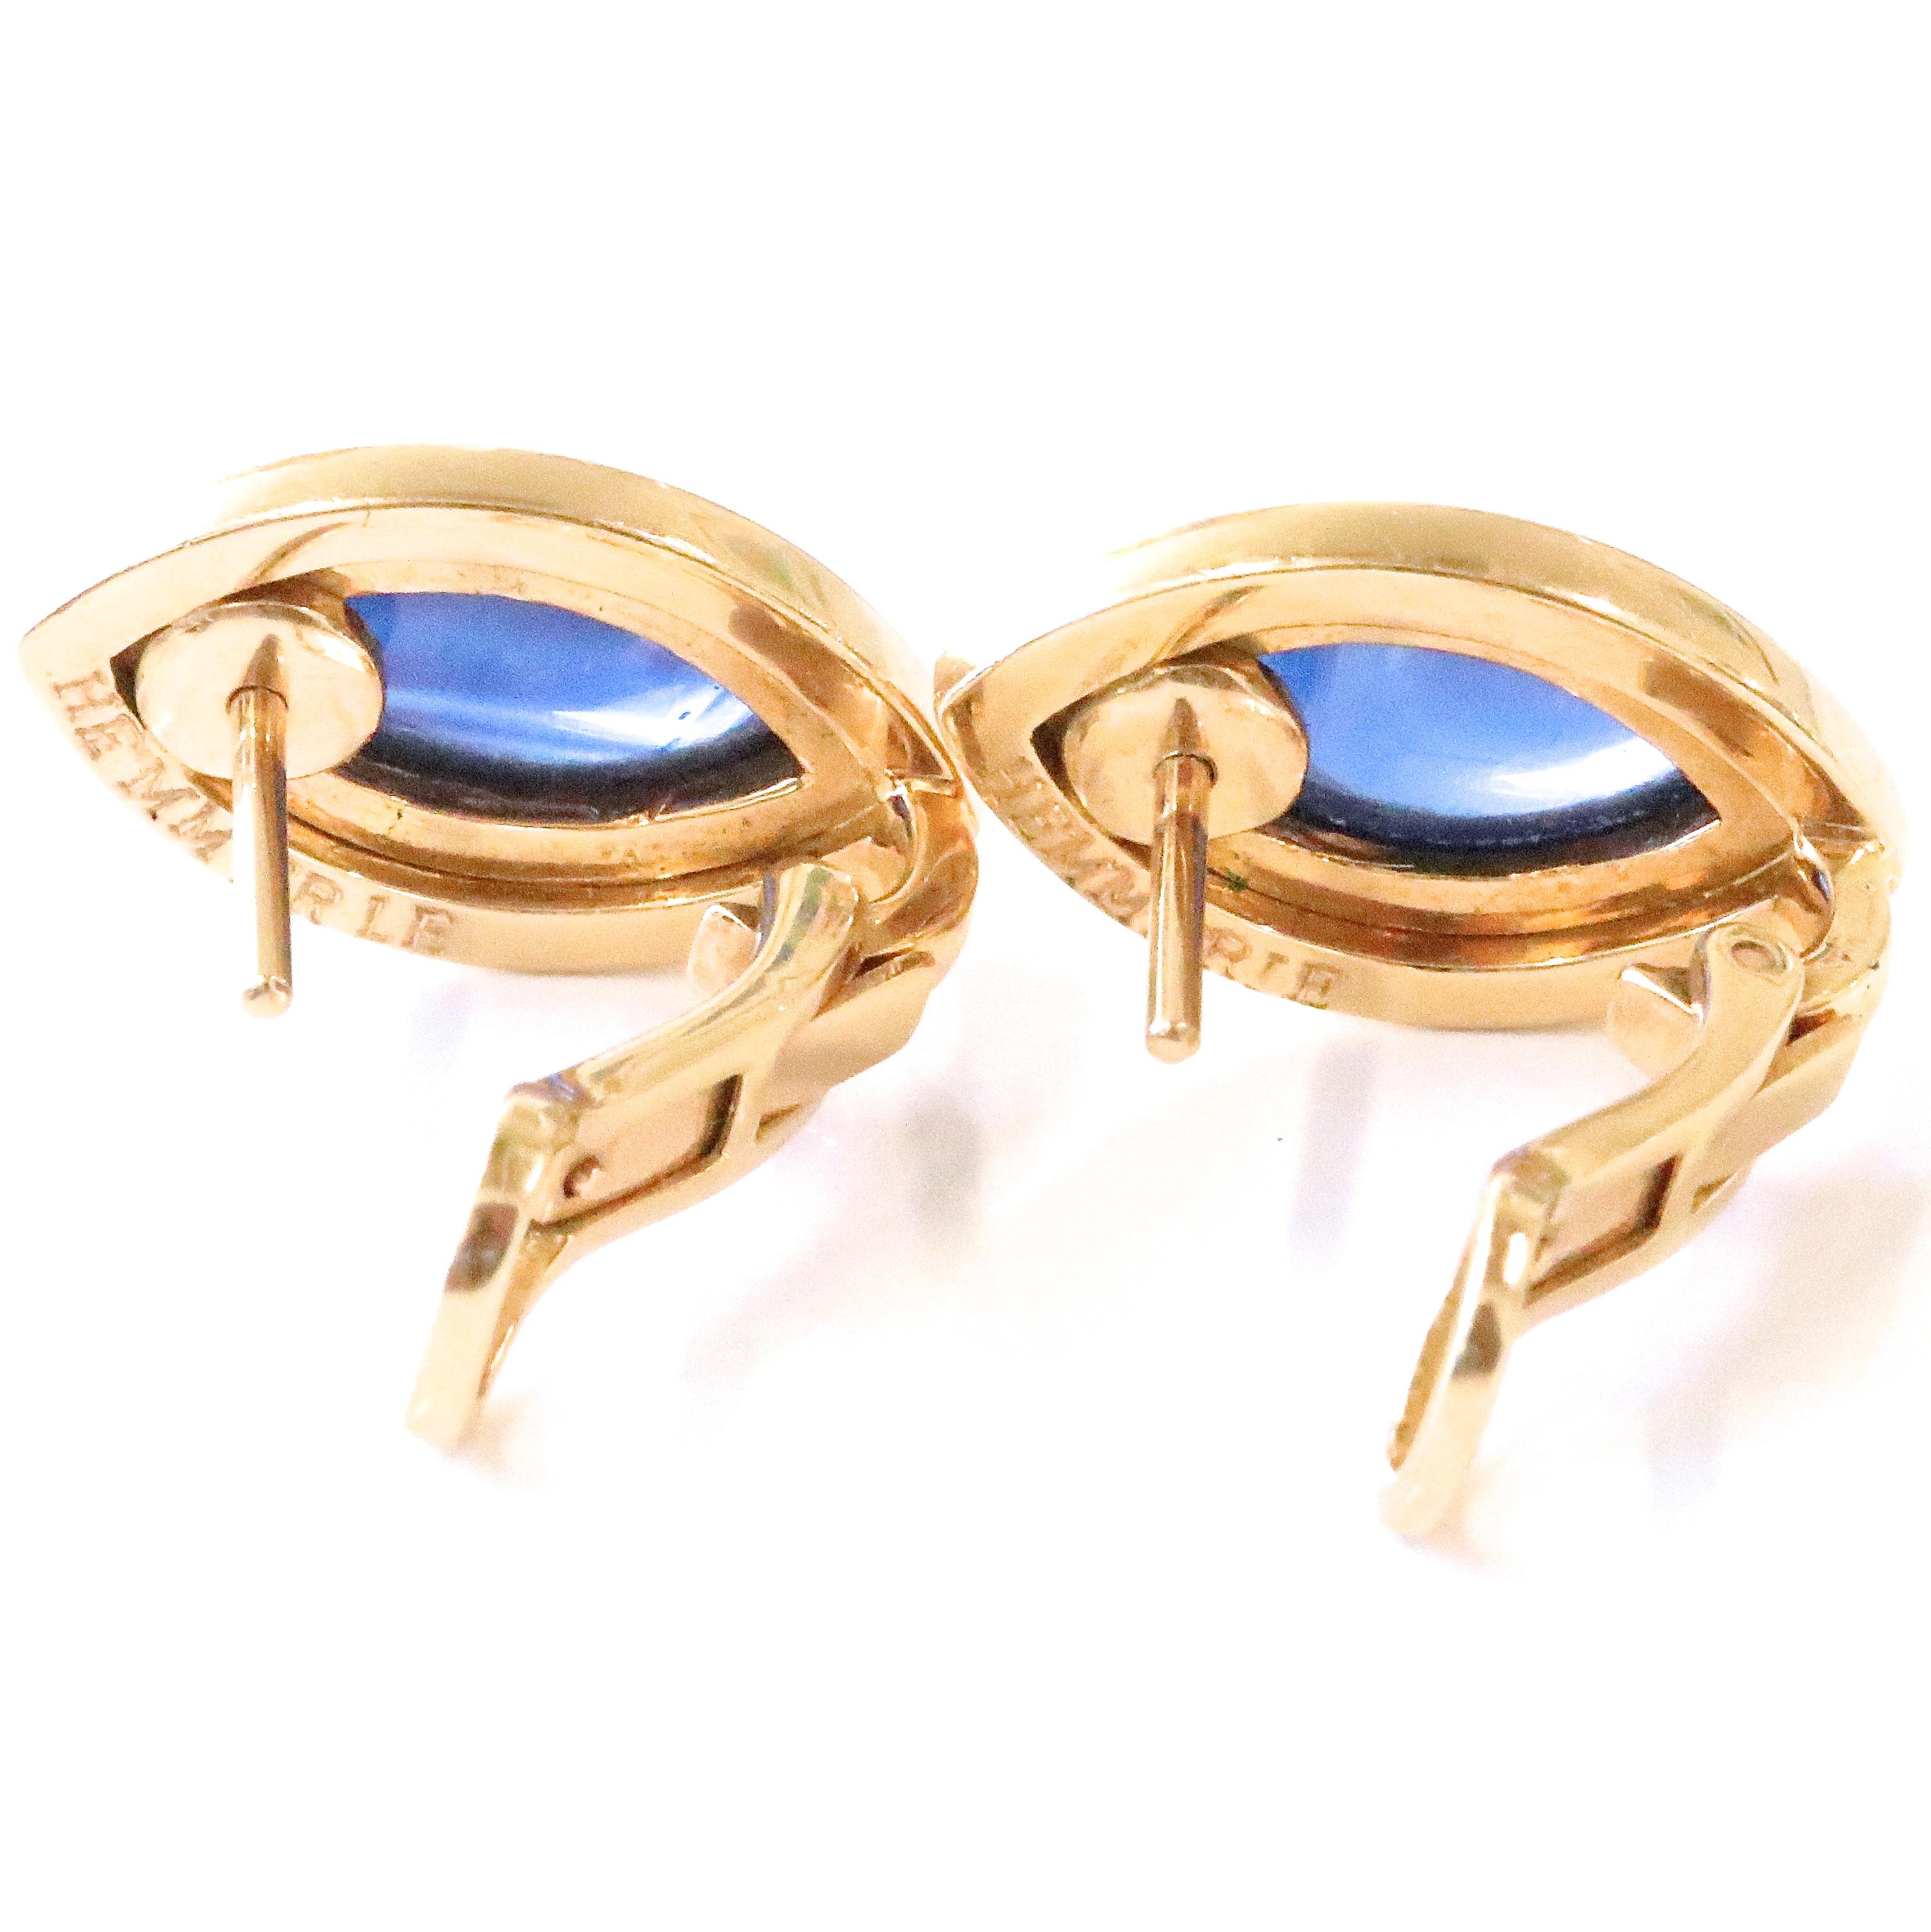 Century-old German jewelry house Hemmerle is a staunch defender of the craftsman’s trade. If you want to feel chic and elegant, consider adding some color to your look with these Vintage Hemmerle Sapphire 18k Gold Earrings. These stunning earrings